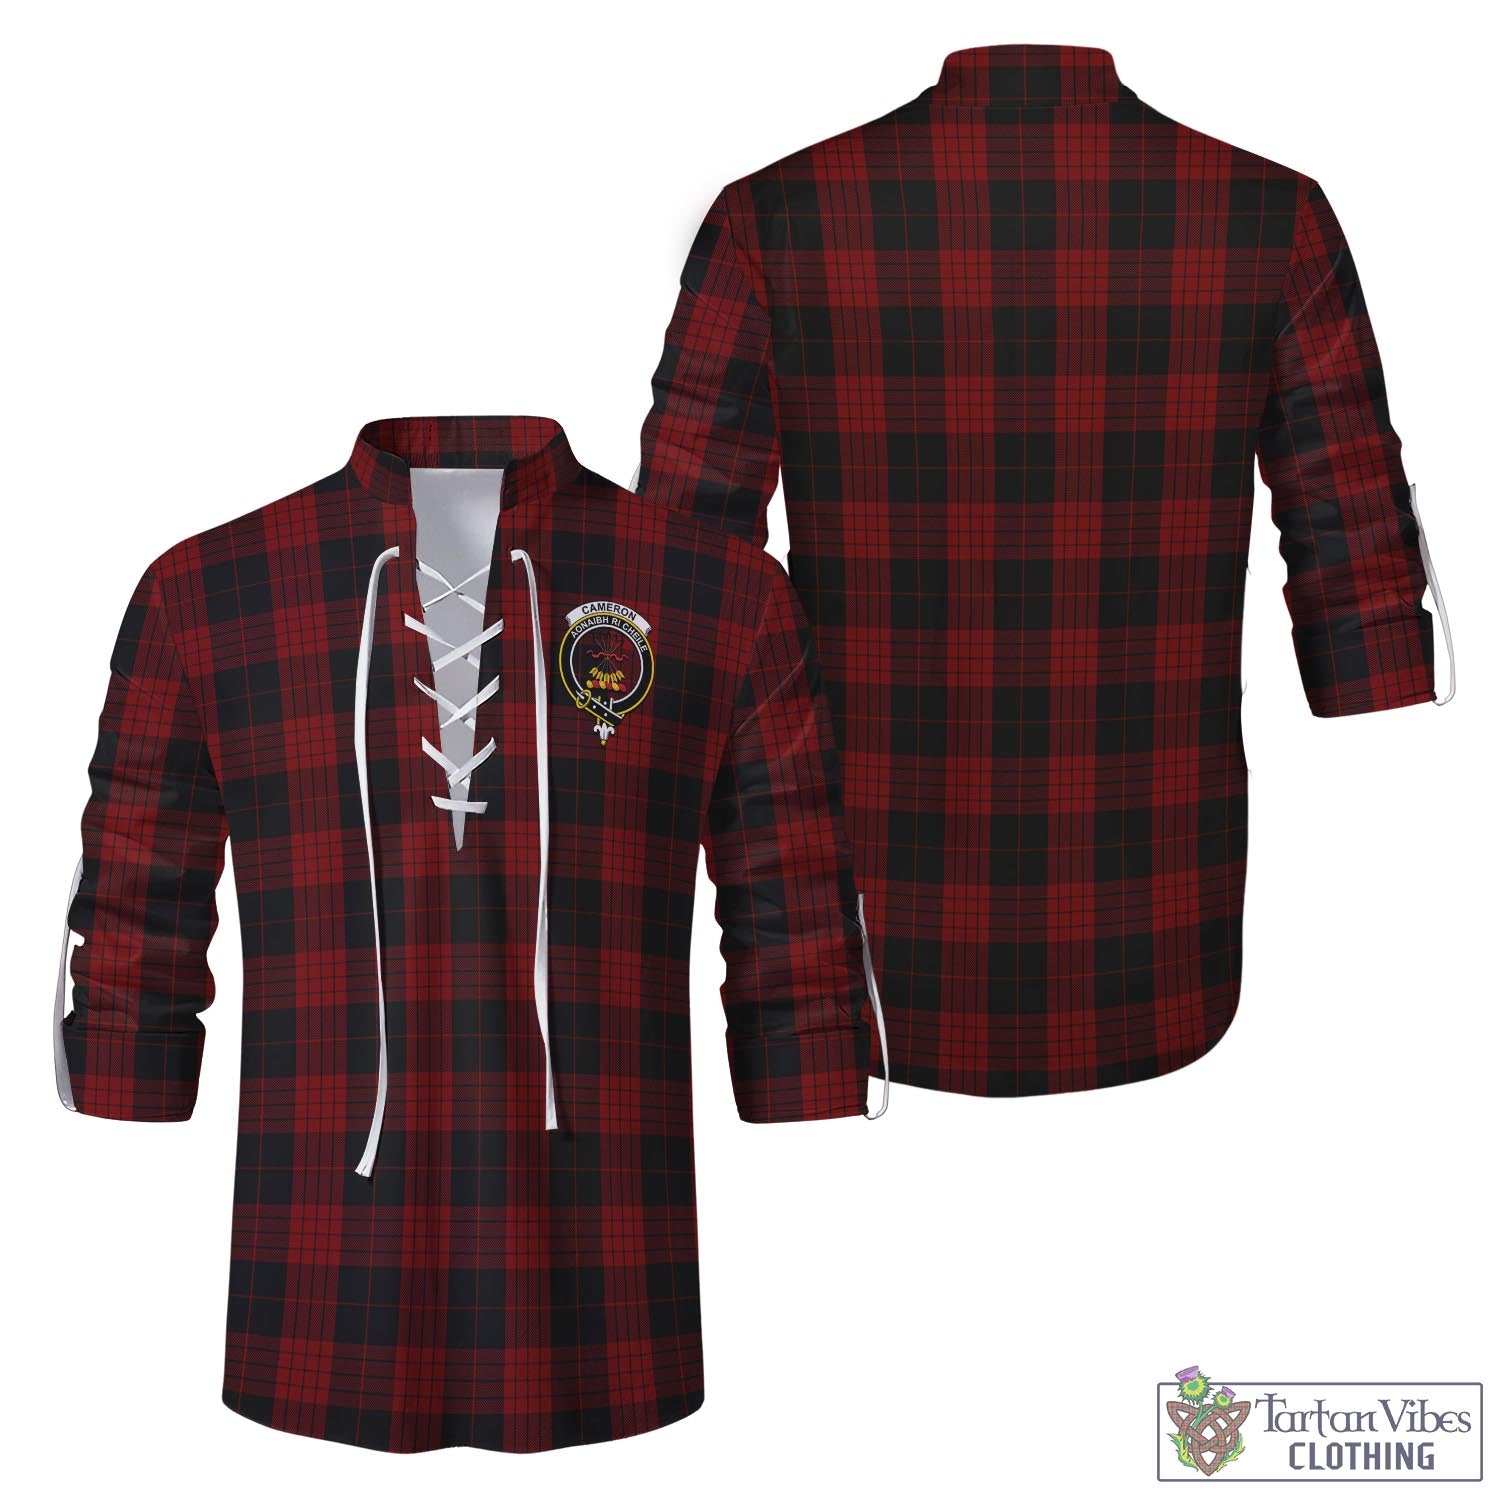 Tartan Vibes Clothing Cameron Black and Red Tartan Men's Scottish Traditional Jacobite Ghillie Kilt Shirt with Family Crest